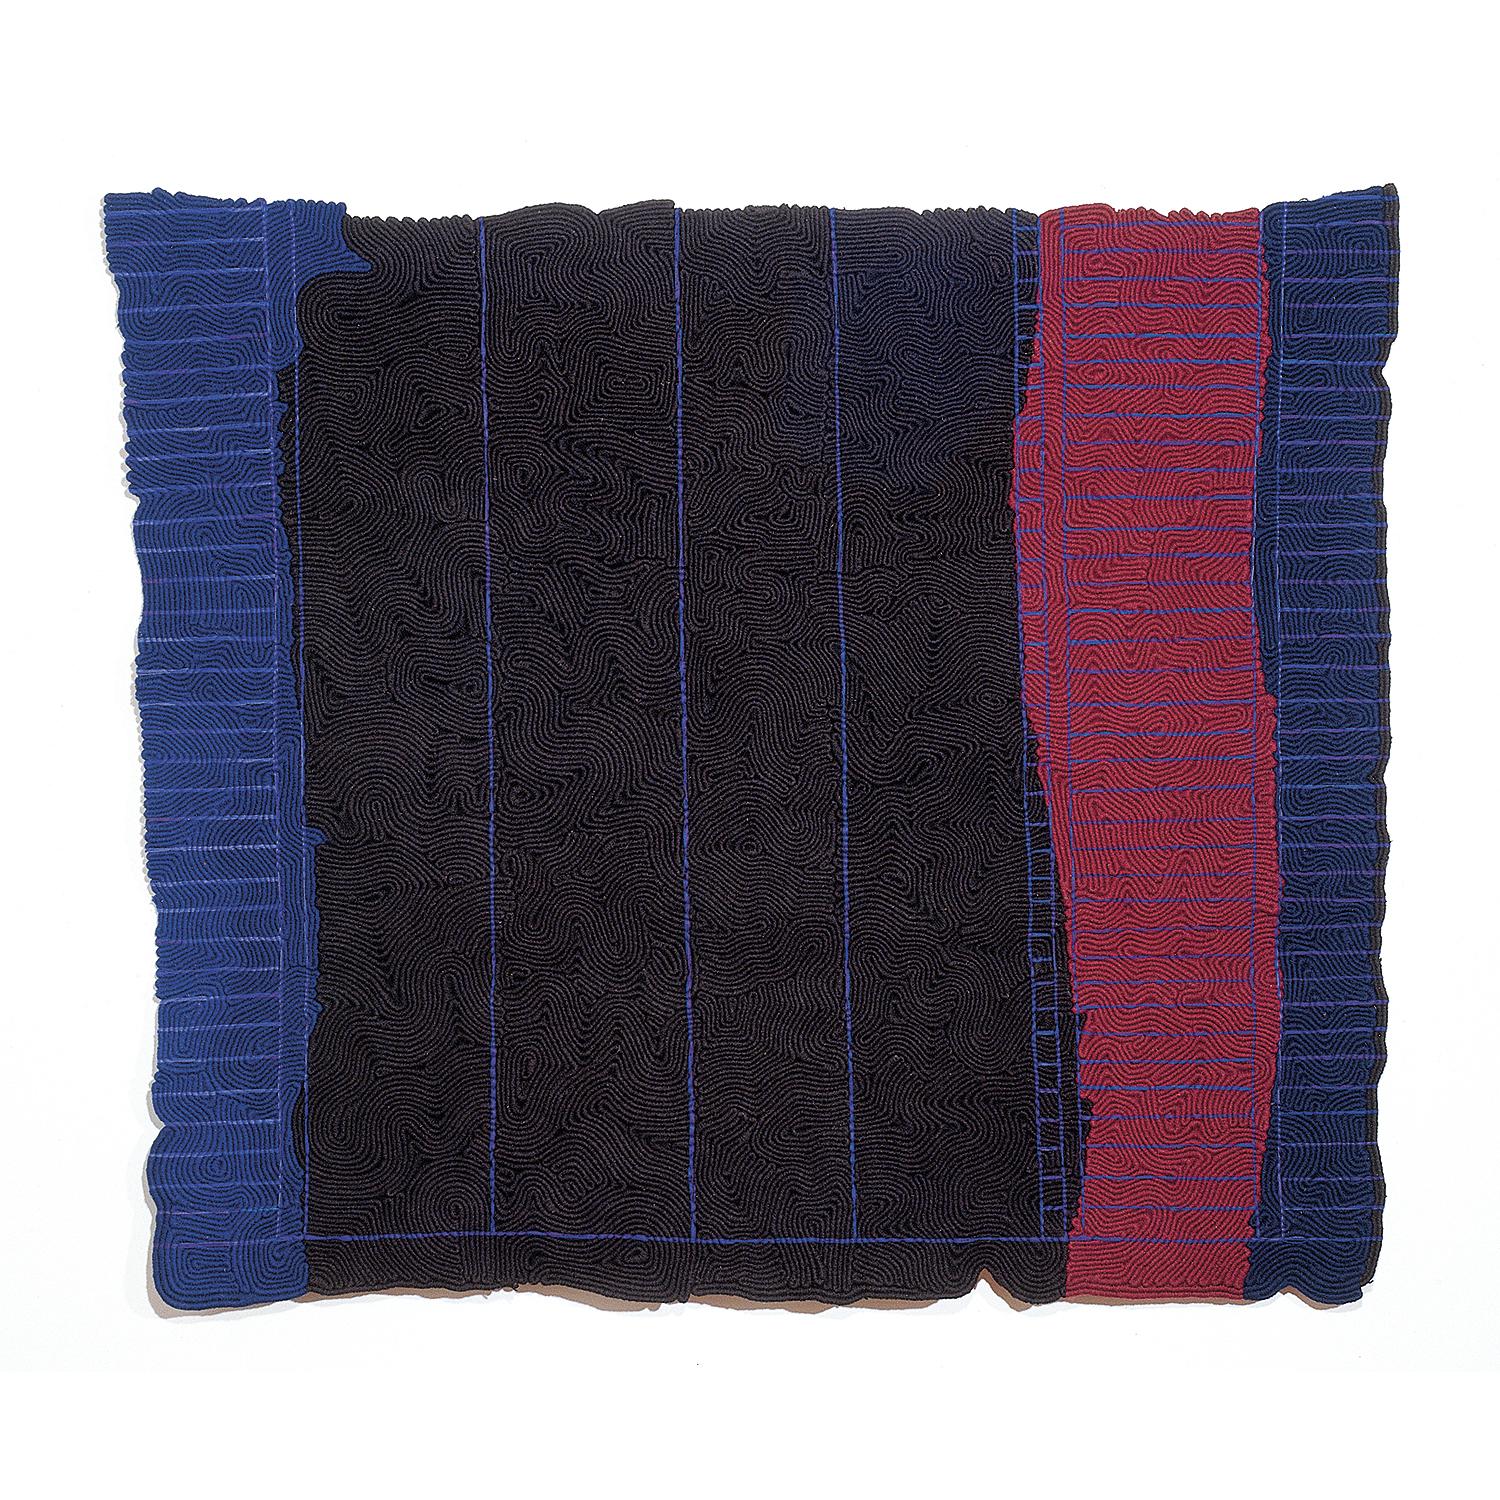 Black No II Blue, Red, Hand-Woven Tapestry, Textile Wall Sculpture